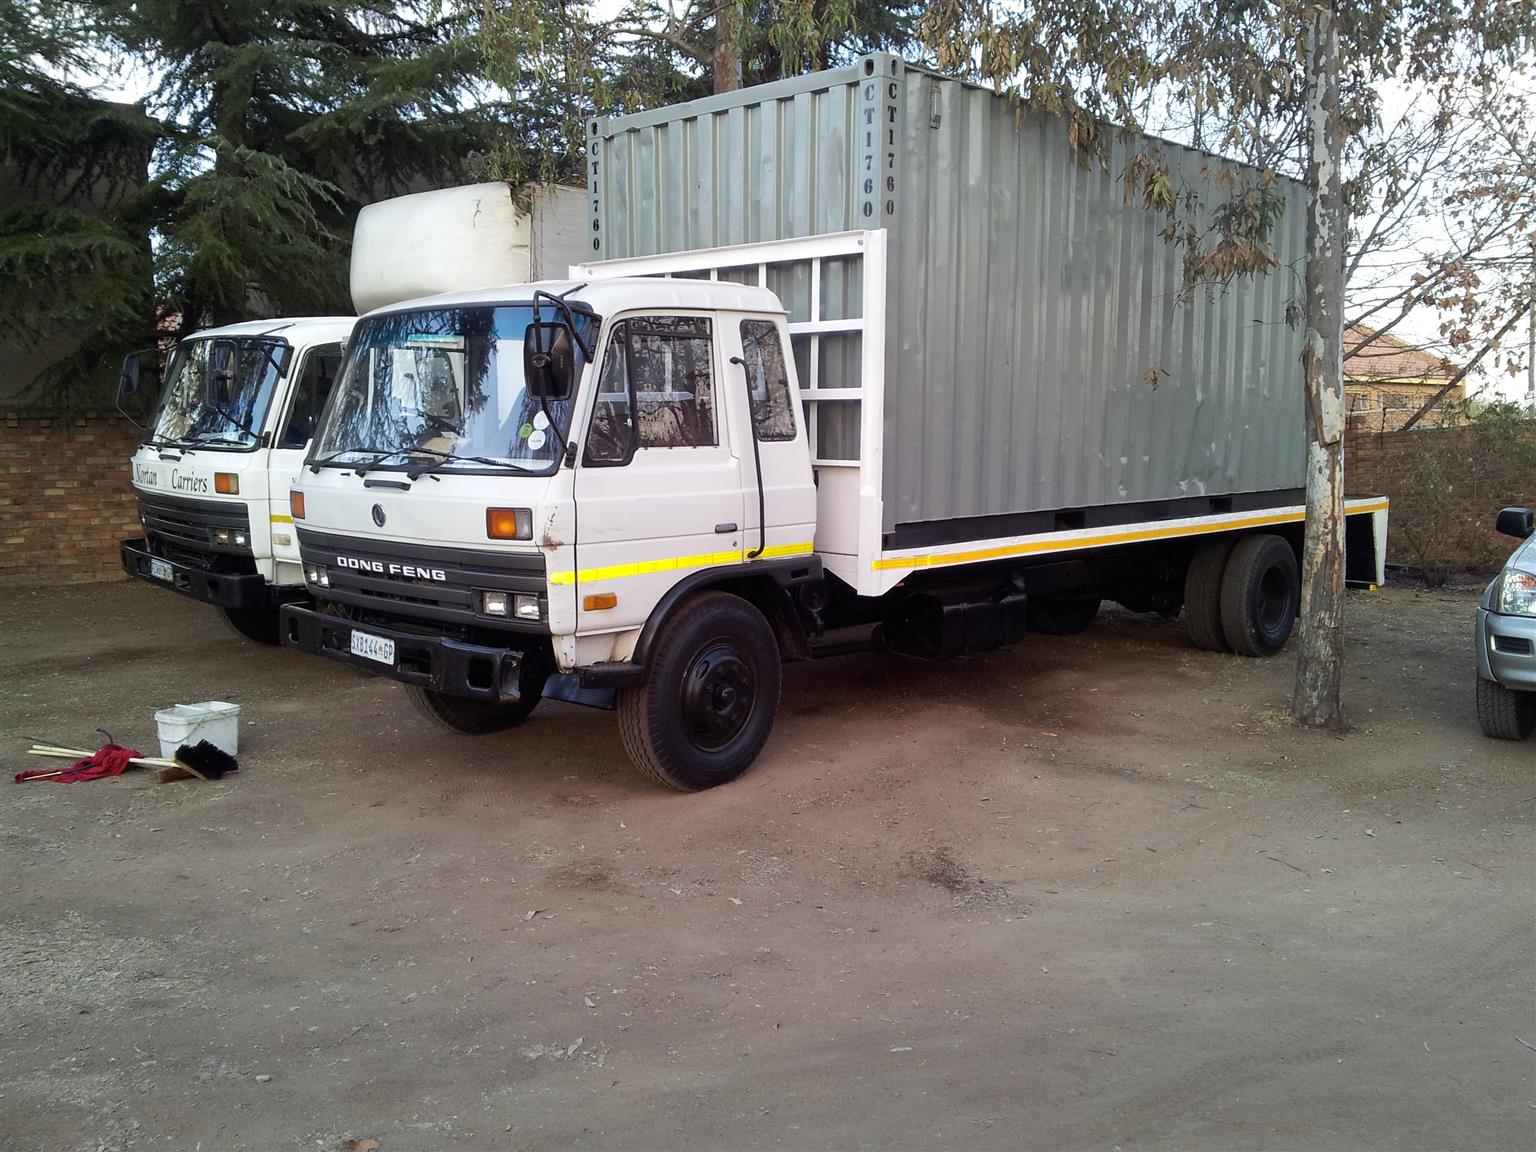 Moving trucks for furniture removals, truck hire, transport delivery